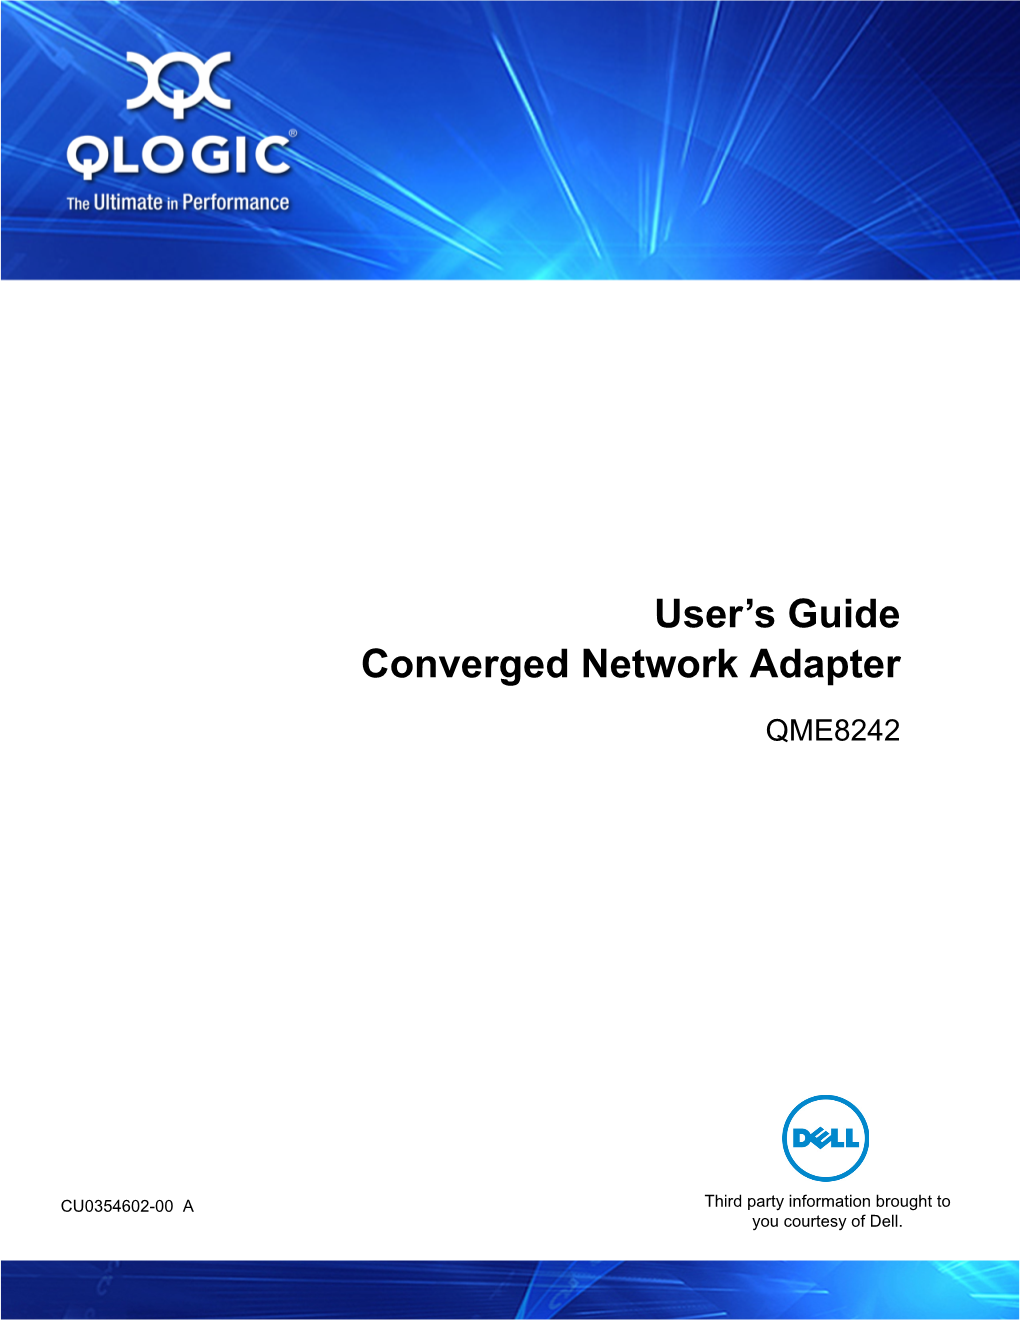 User's Guide for Converged Network Adapter QME8242